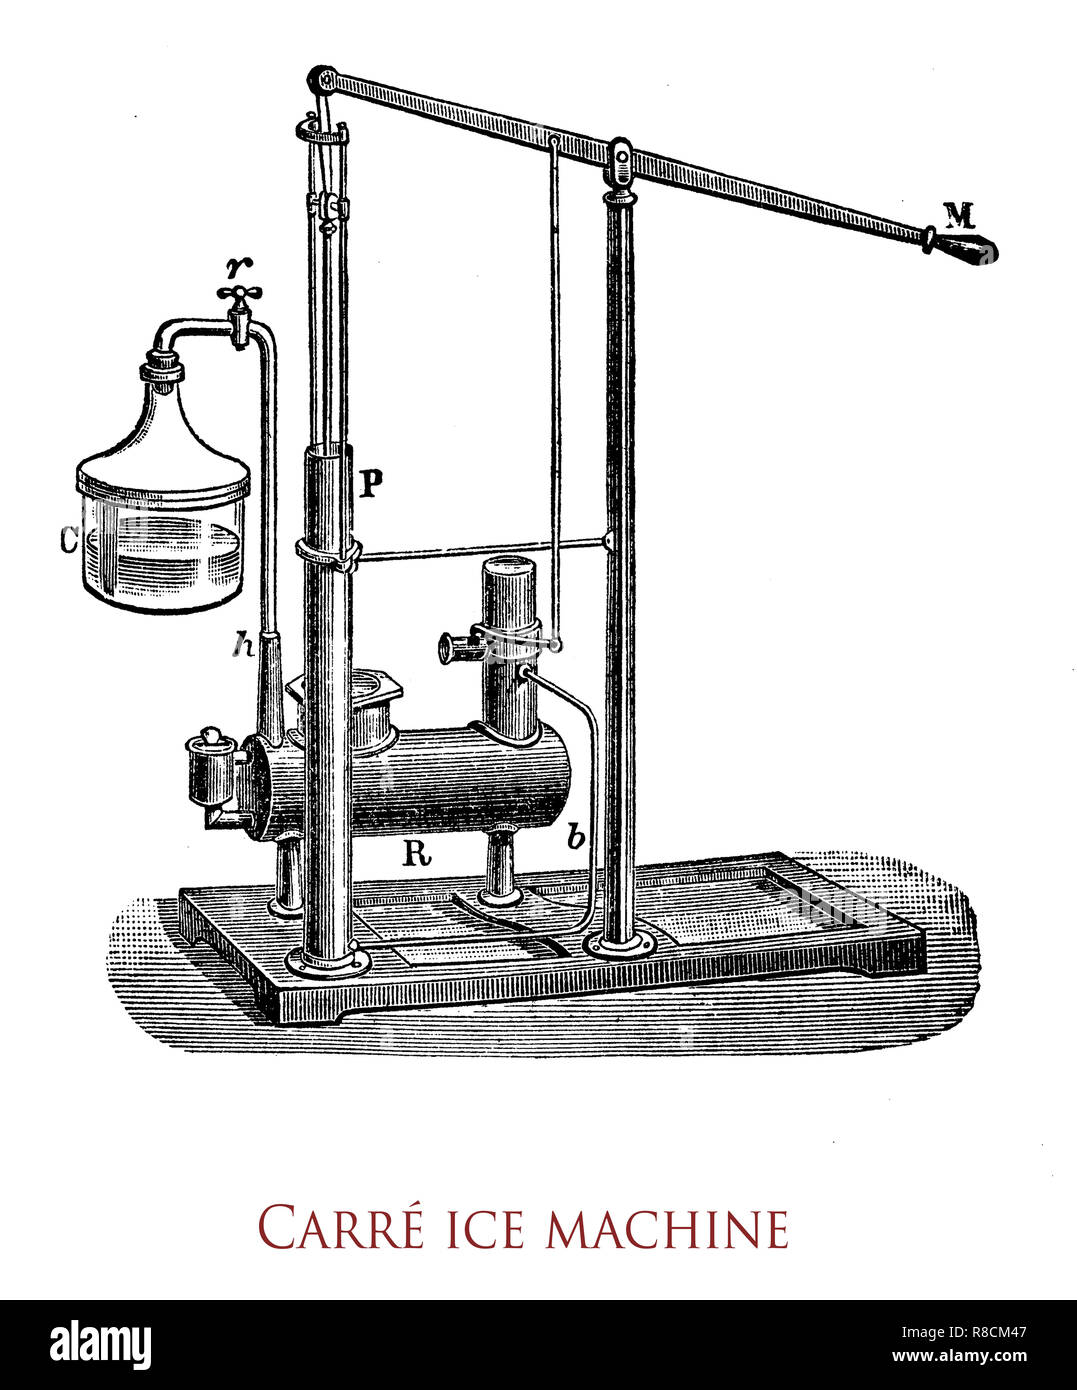 Edmond Carré (1833 – 1894) developed the first absorption refrigerator ice machine, using water and sulphuric acid Stock Photo